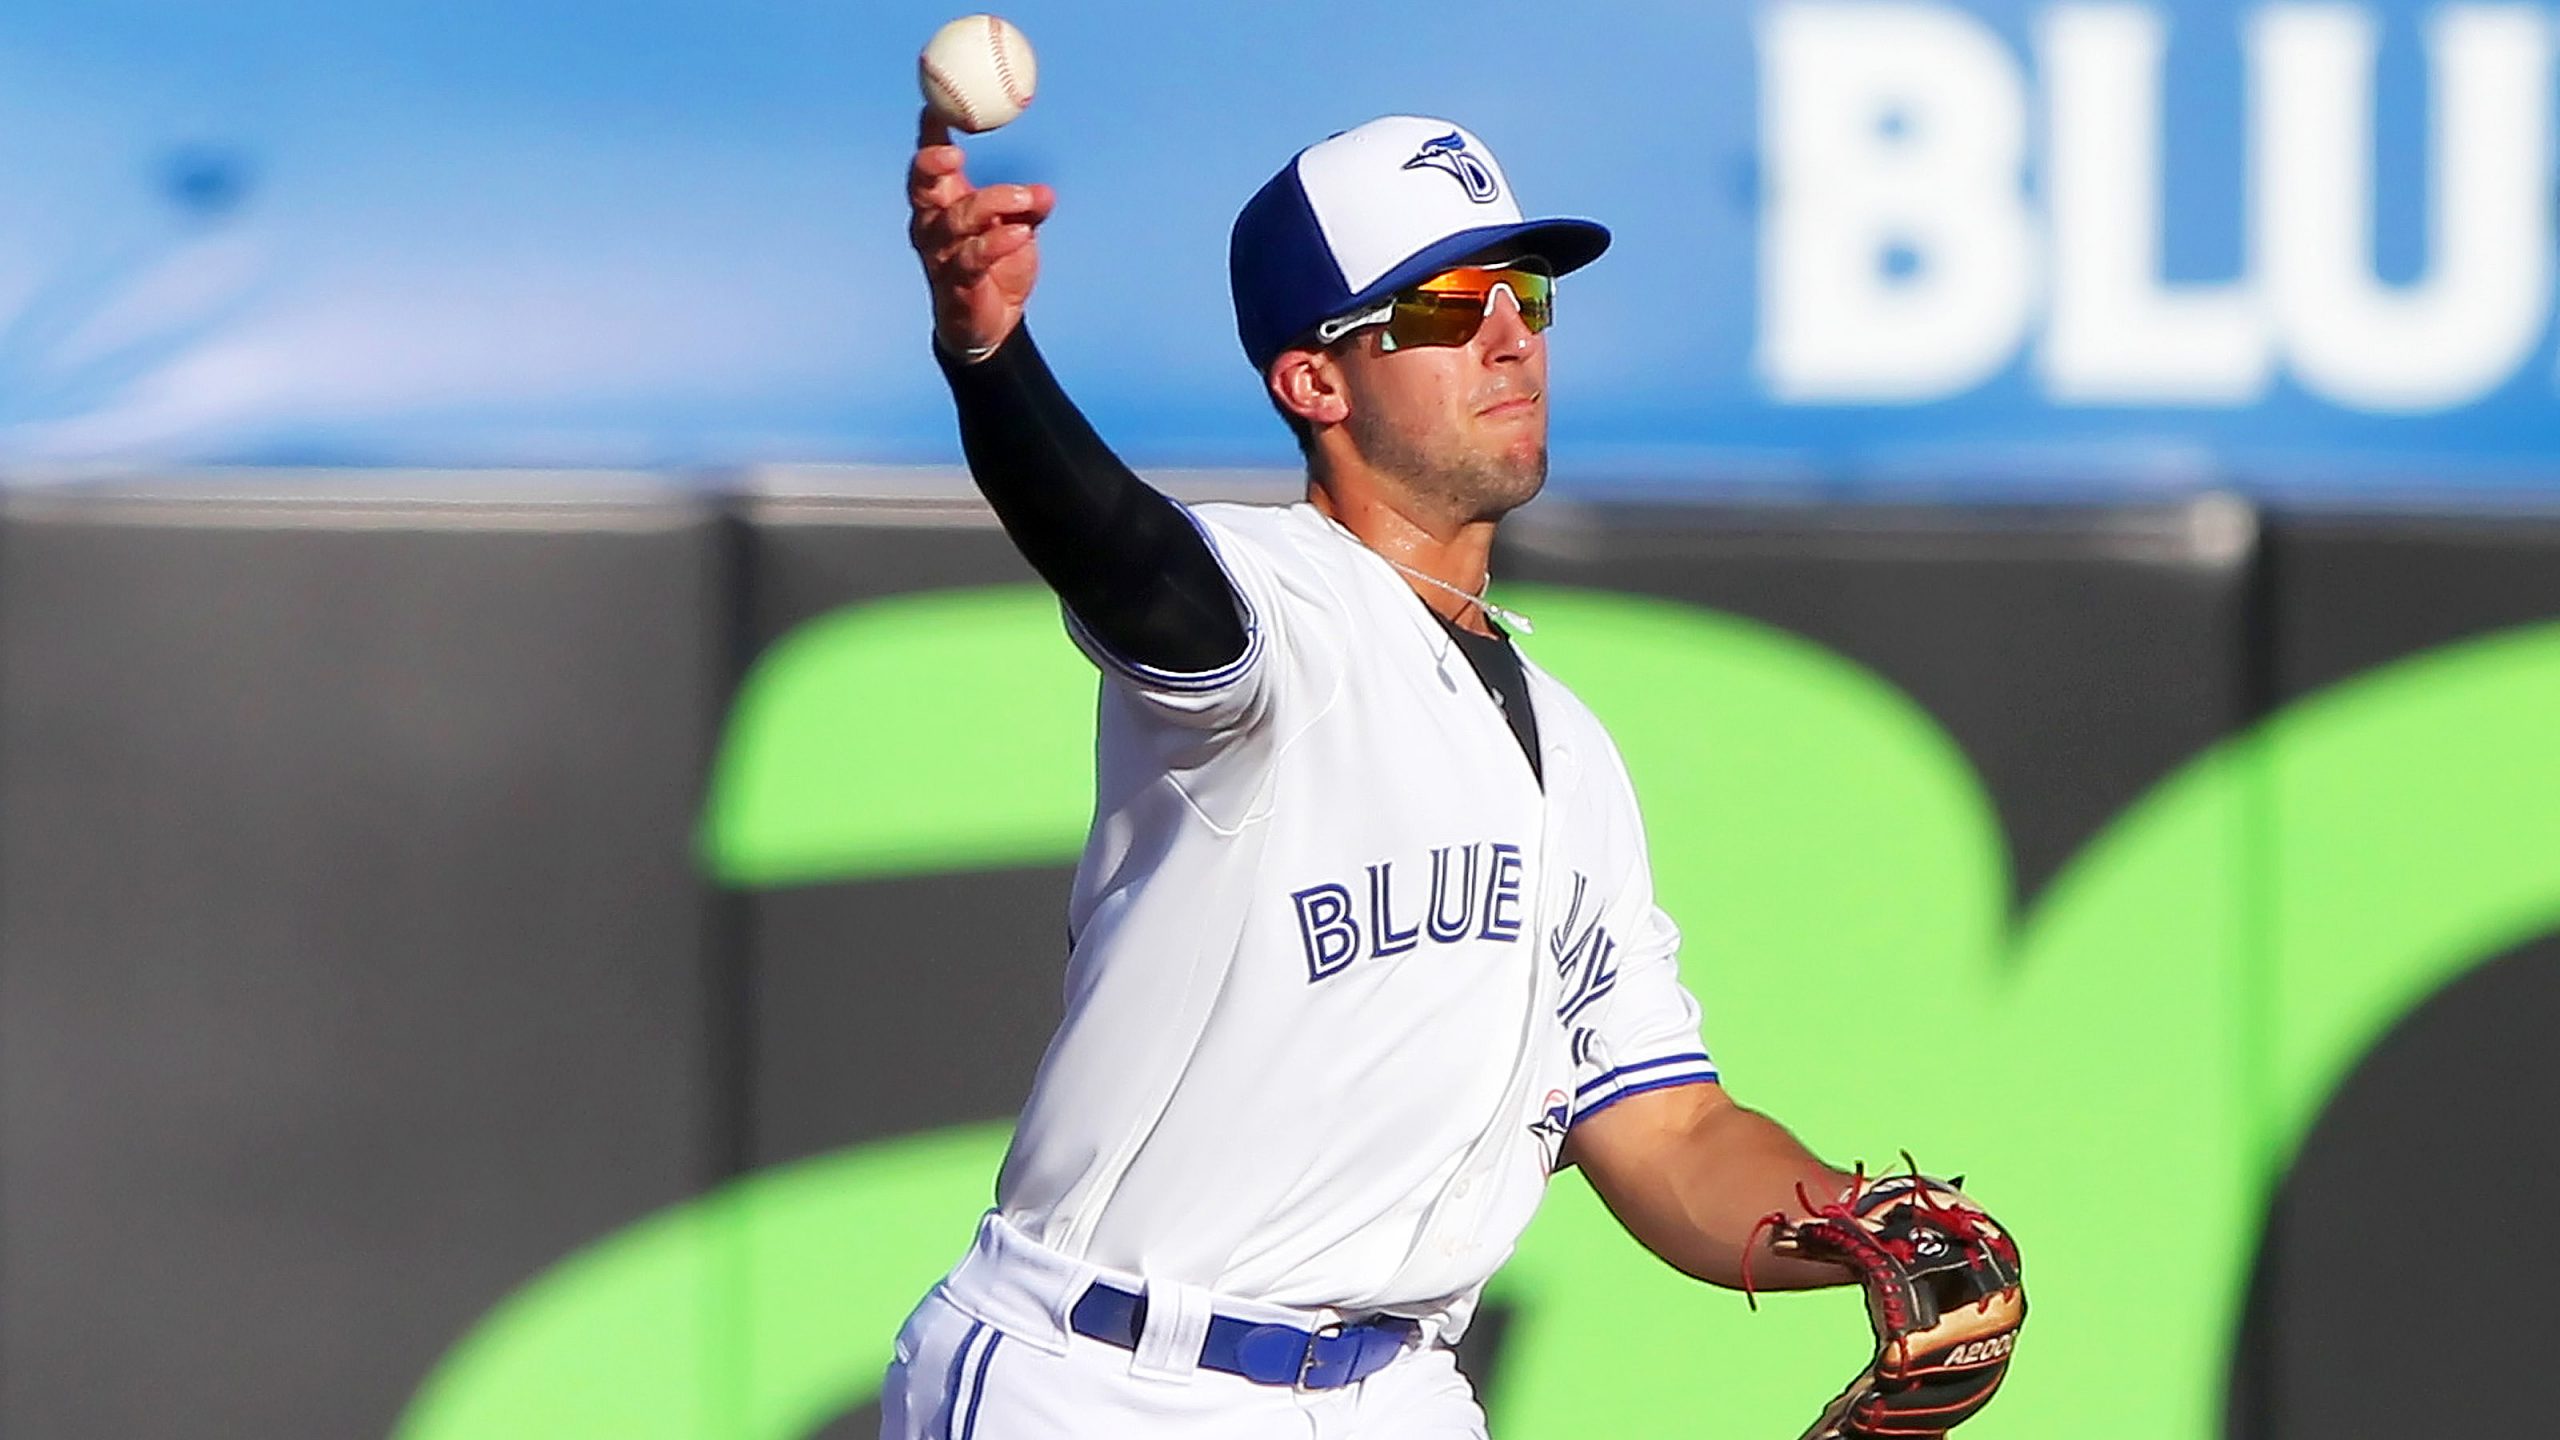 Blue Jays prospects Warmoth, Smith learning how to grow from struggles